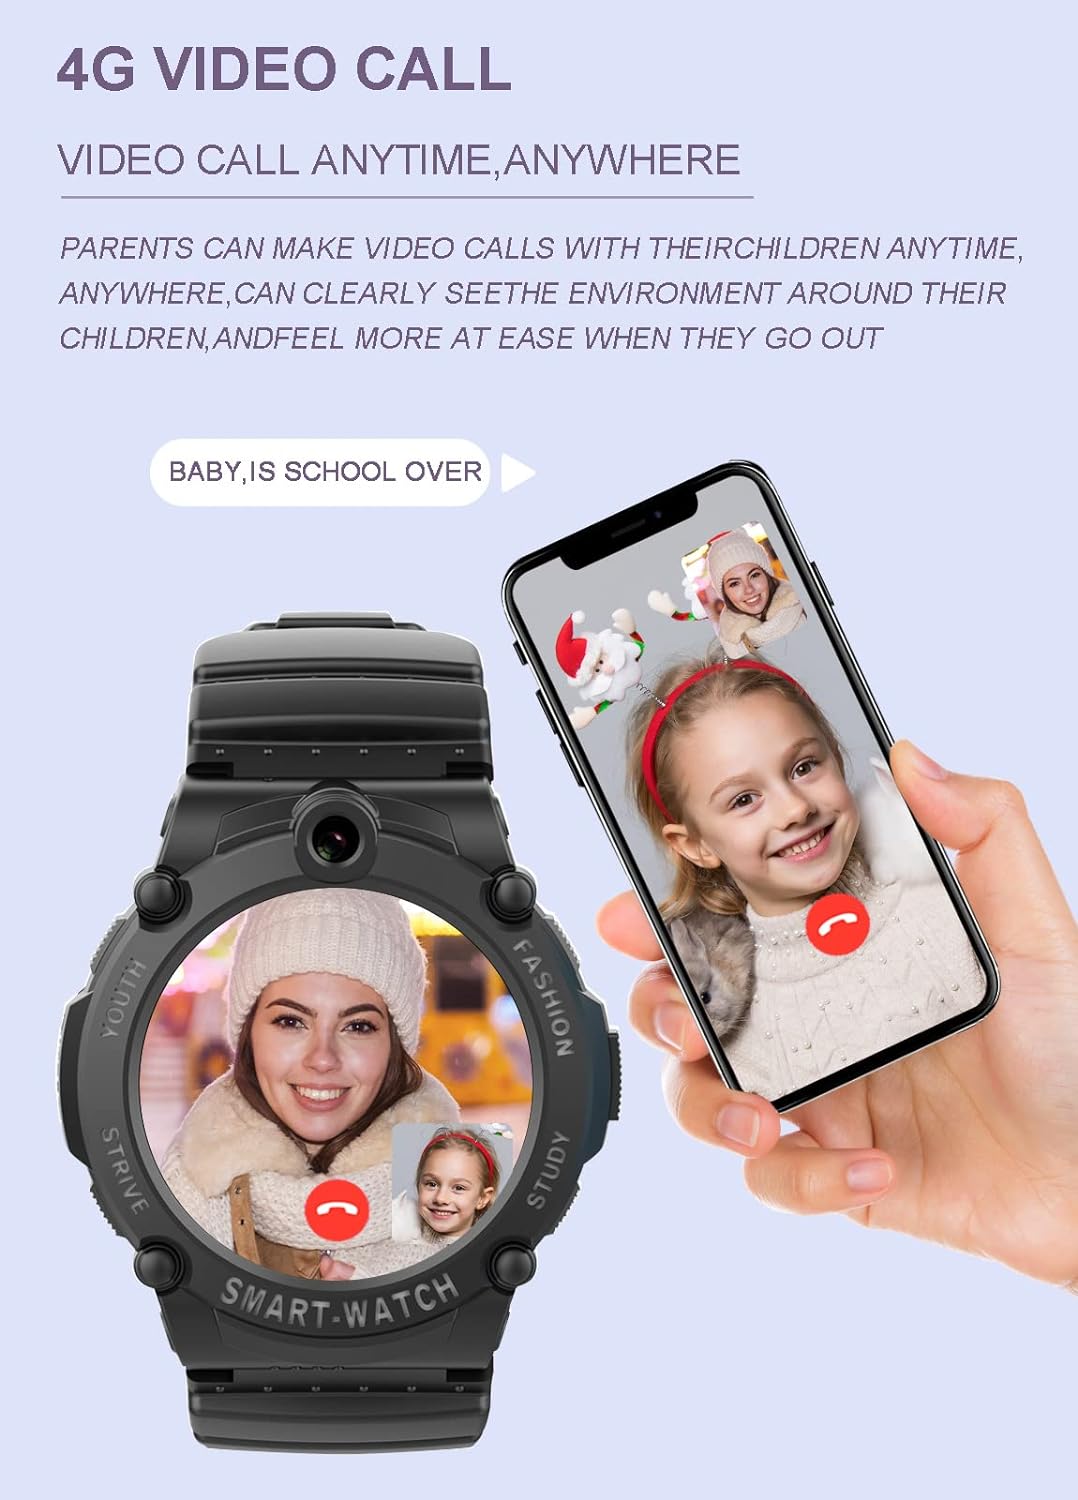 4G GPS Kids Smart Watch Phone, Smartwatch with Anti-Lost GPS WiFi LBS Location Tracker Round HD Touch Screen Video Phone Call, Voice Chat, MP3 Camera SOS Alarm Pedometer, for Boys Girls Gifts(Black)